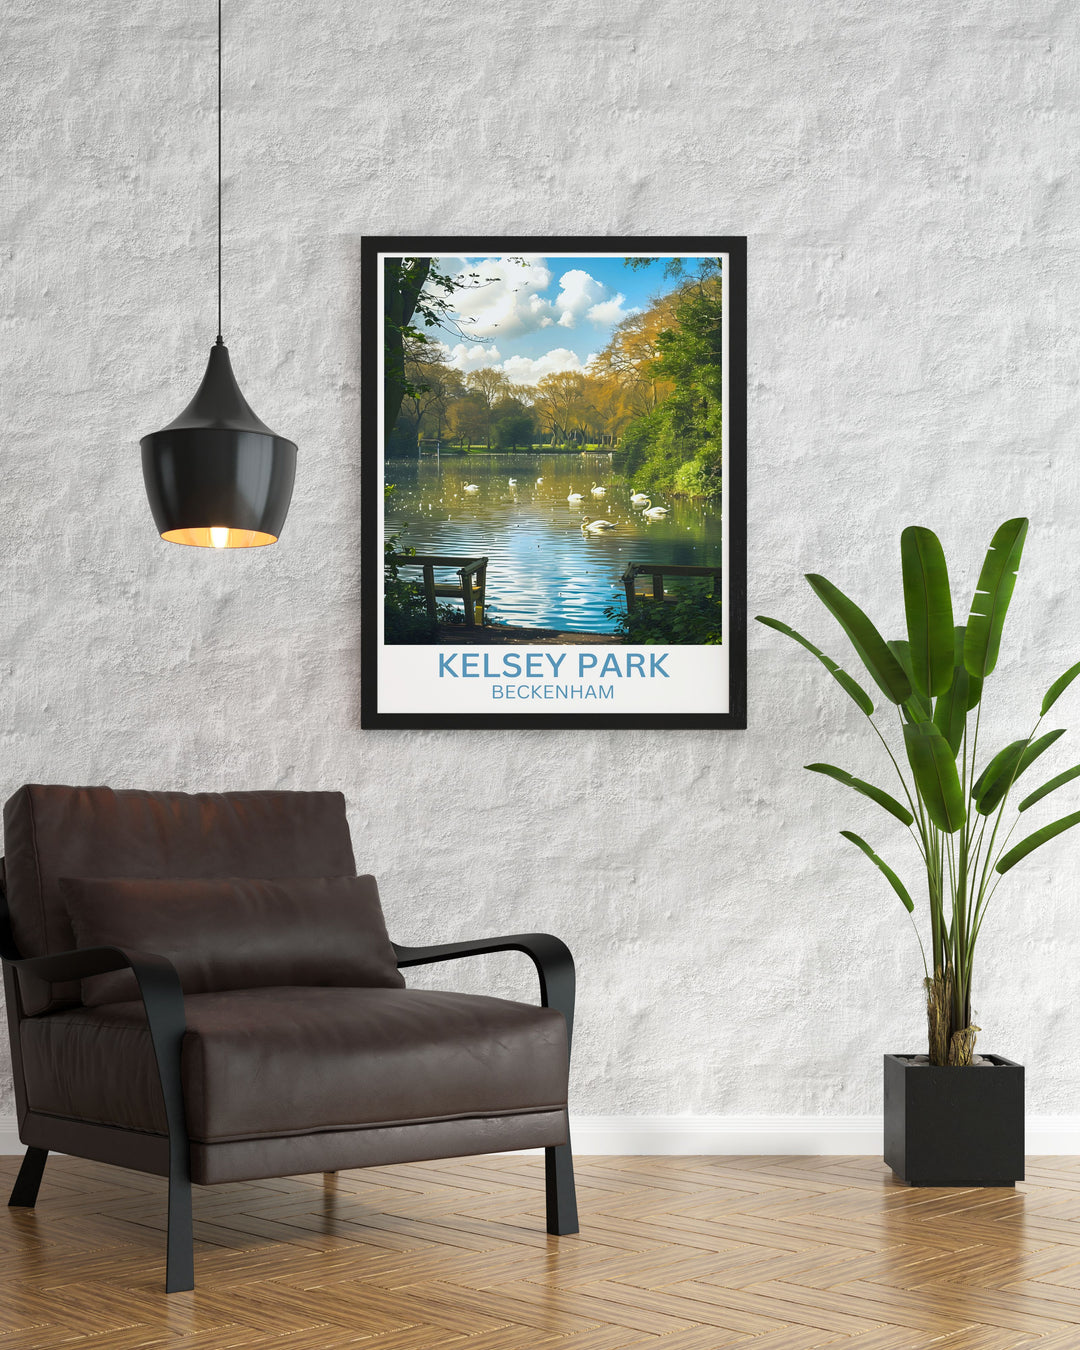 Travel poster of Beckenham featuring iconic views of Kelsey Park and its natural tranquility suitable for any travel enthusiast